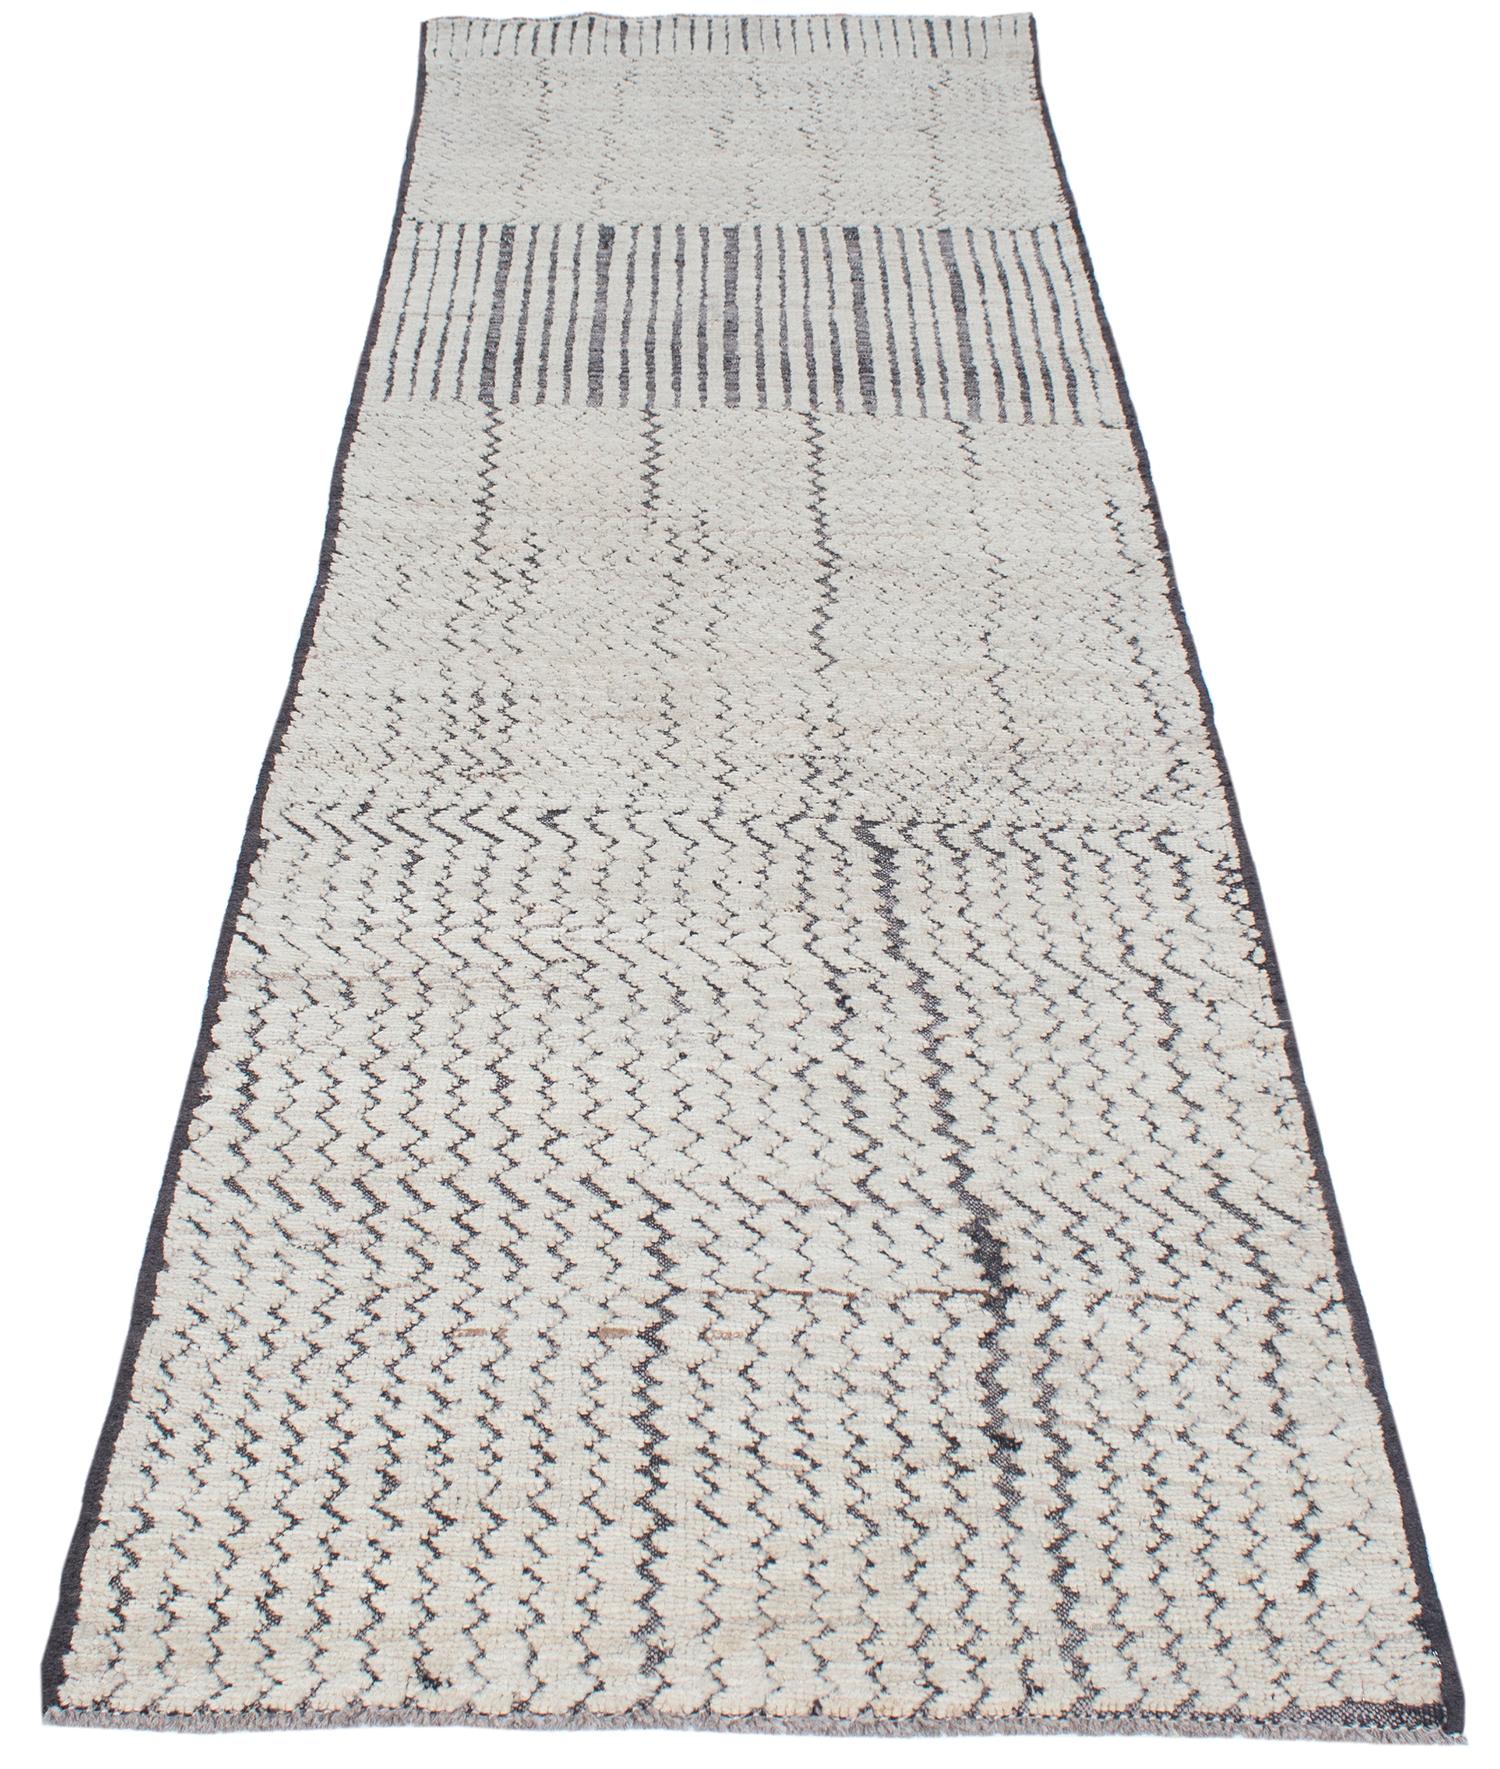 This is a beautiful runner made of 100% handspun and handcarded wool, entirely undyed. It features an abstract design titled 